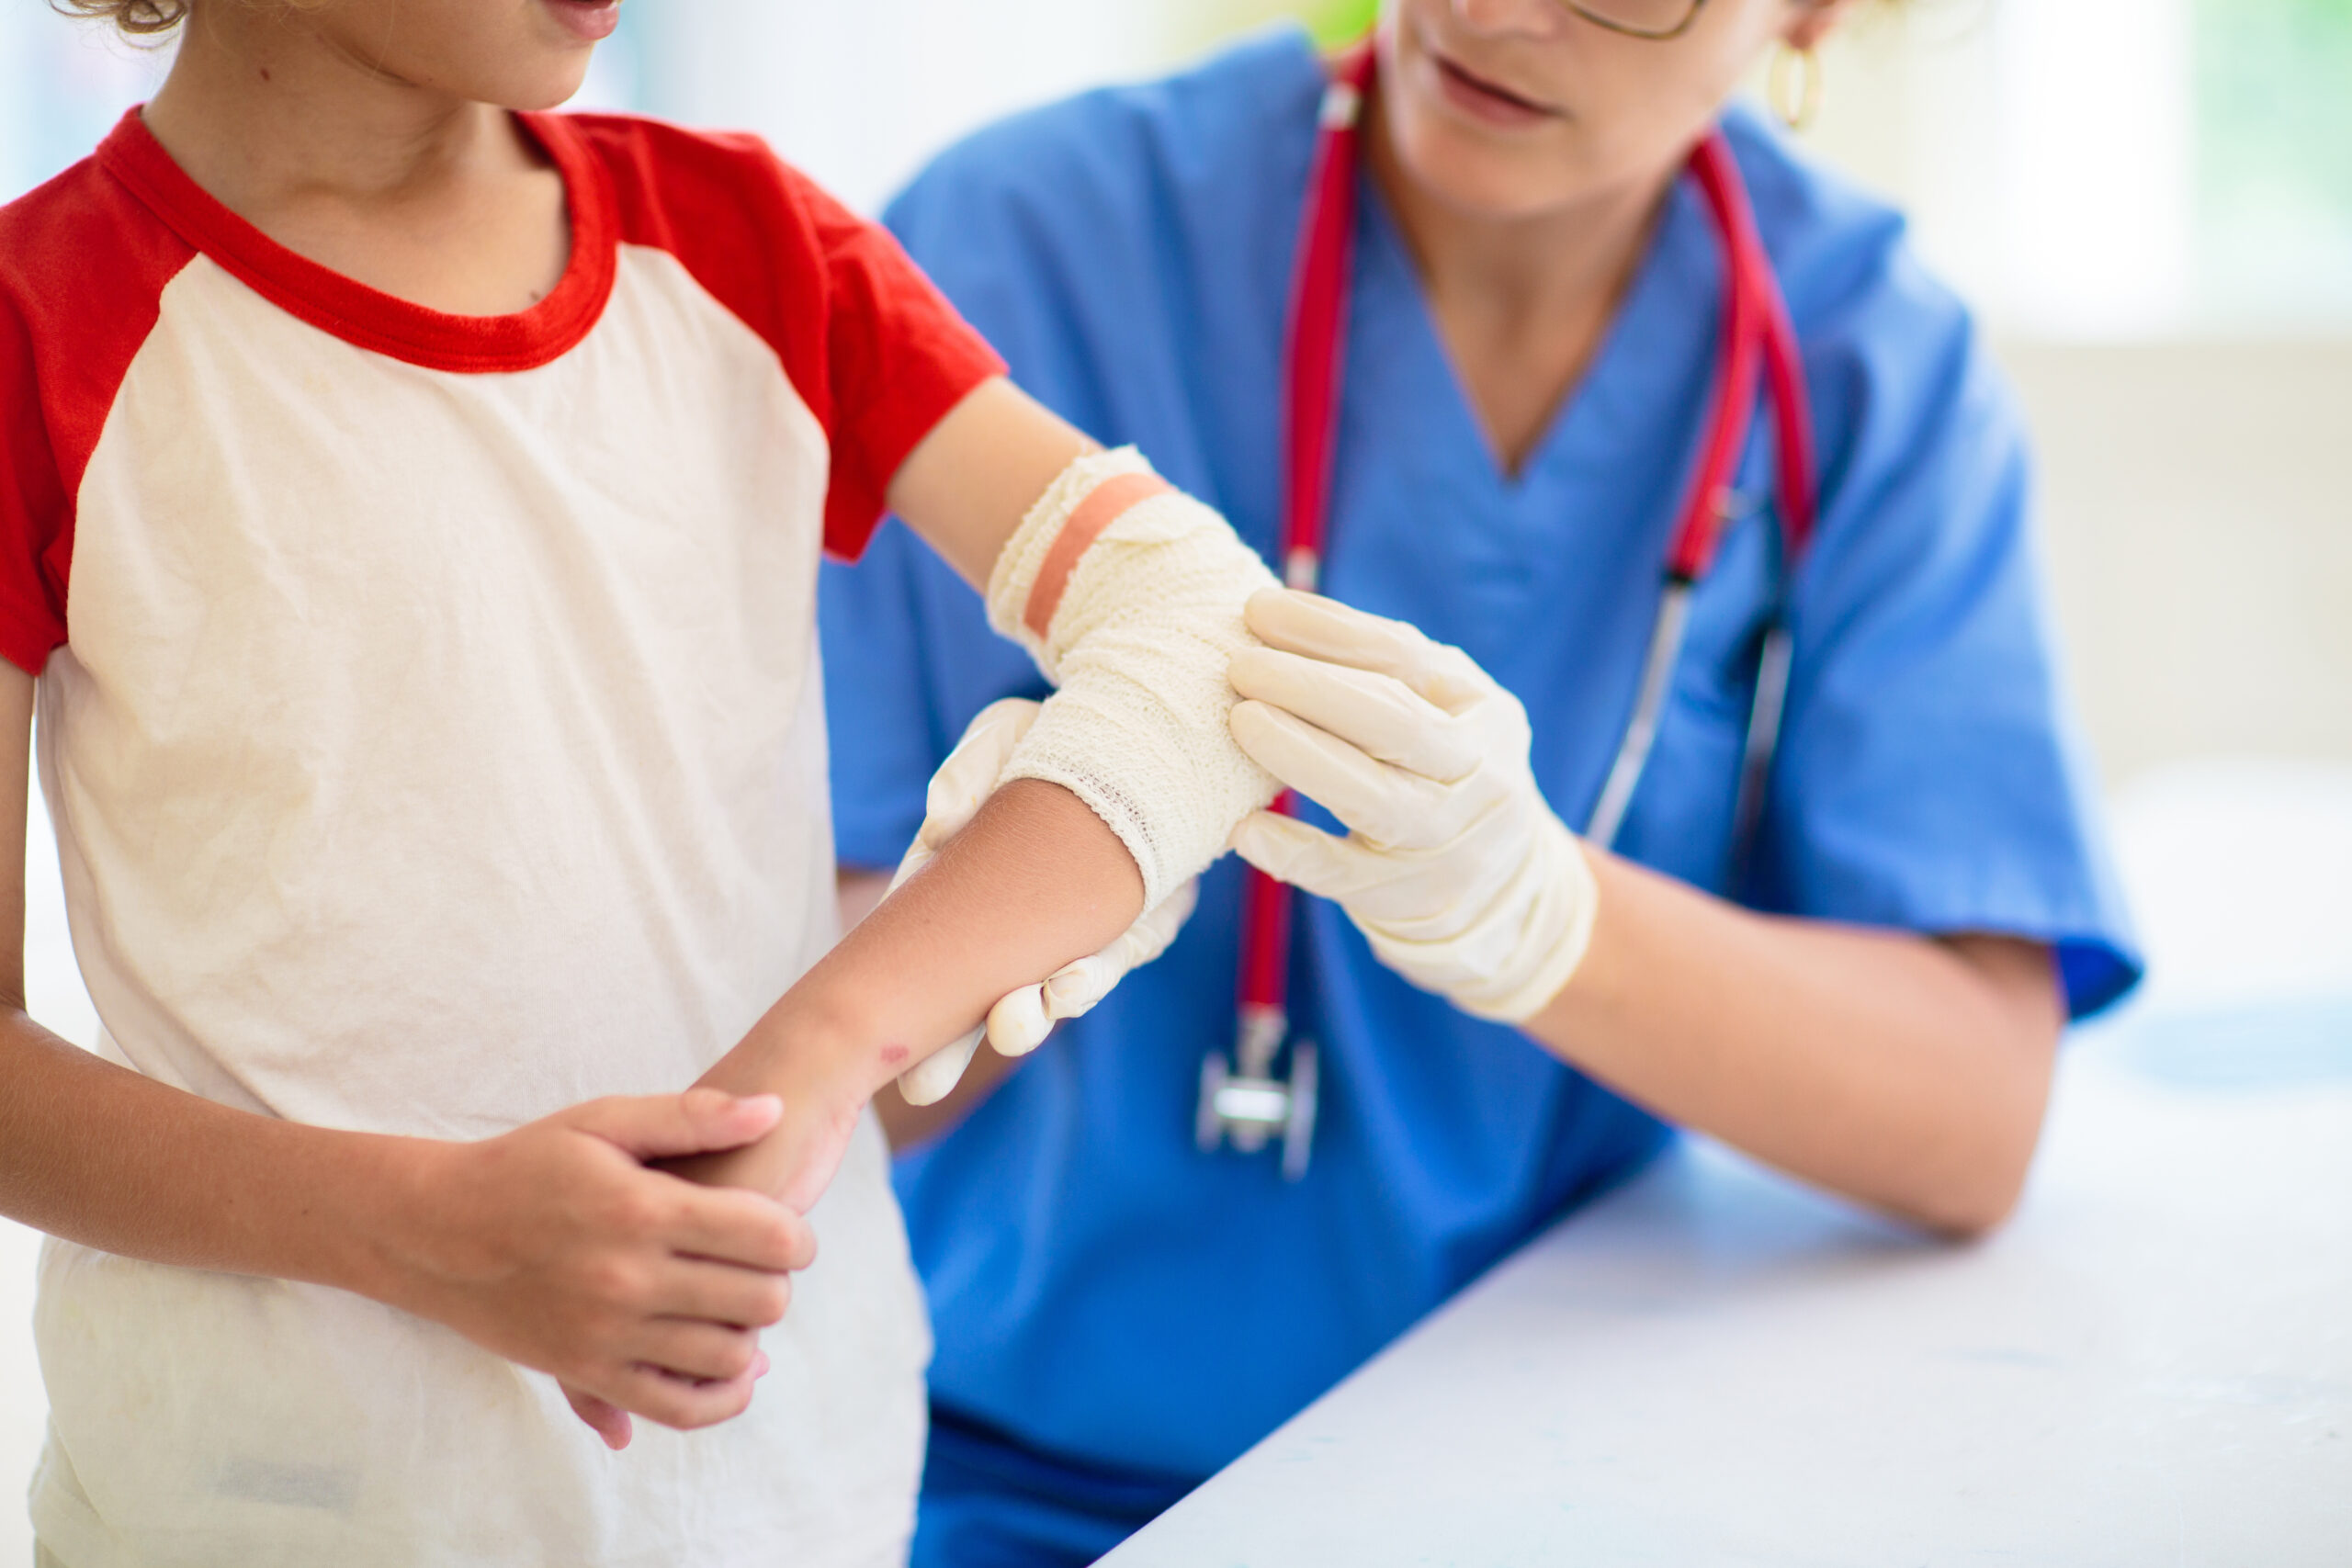 Nurse tends to a kid with an elbow cast at health clinic.